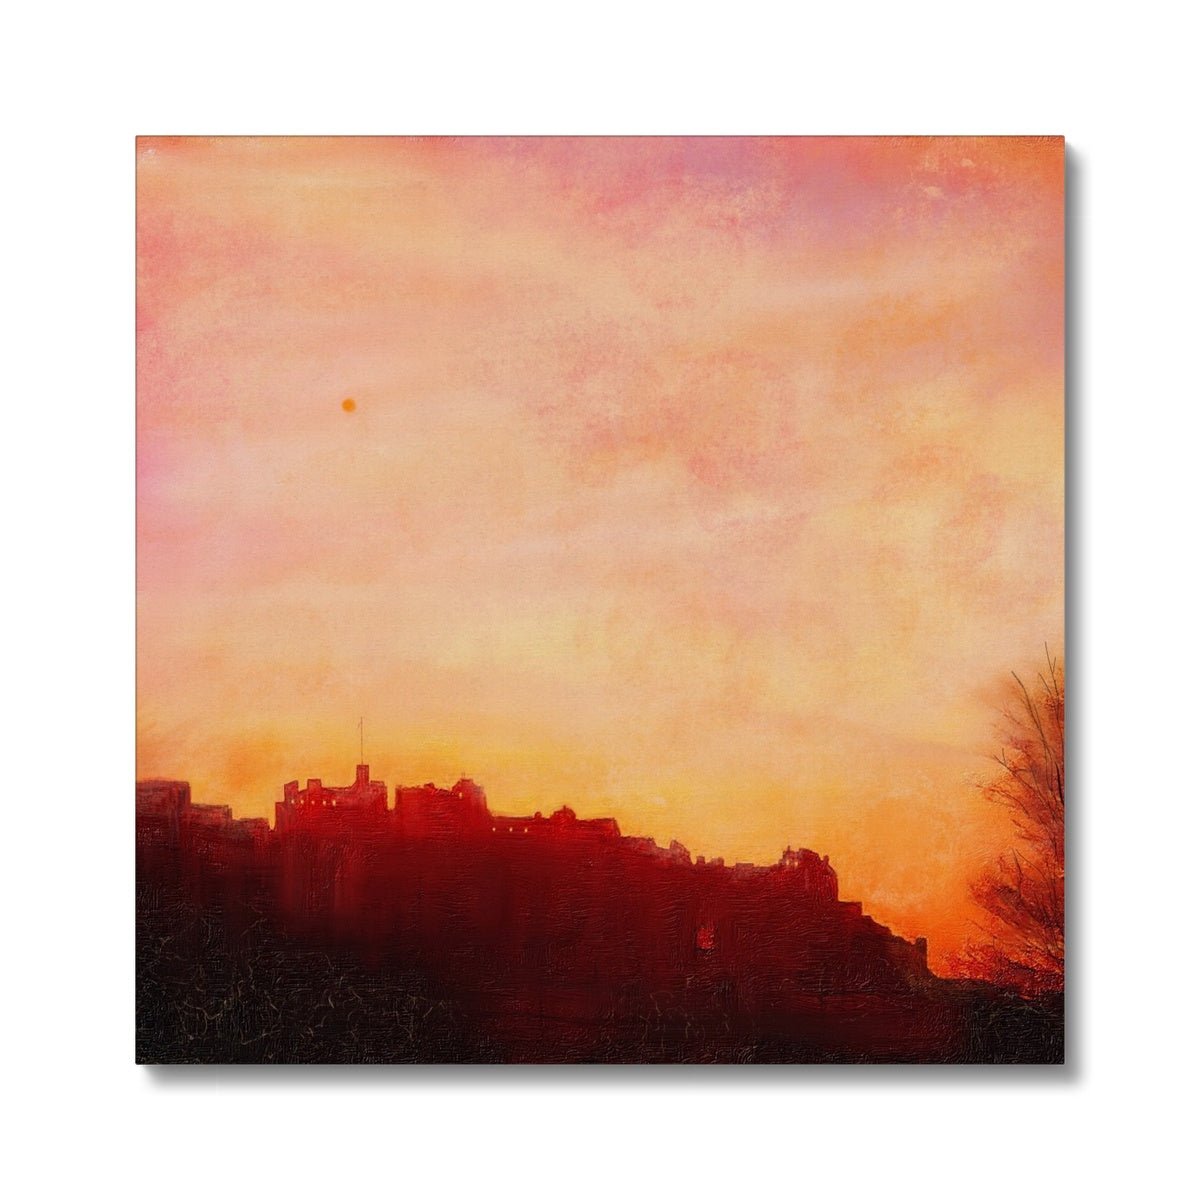 Edinburgh Castle Sunset Painting | Canvas From Scotland-Contemporary Stretched Canvas Prints-Historic & Iconic Scotland Art Gallery-24"x24"-Paintings, Prints, Homeware, Art Gifts From Scotland By Scottish Artist Kevin Hunter